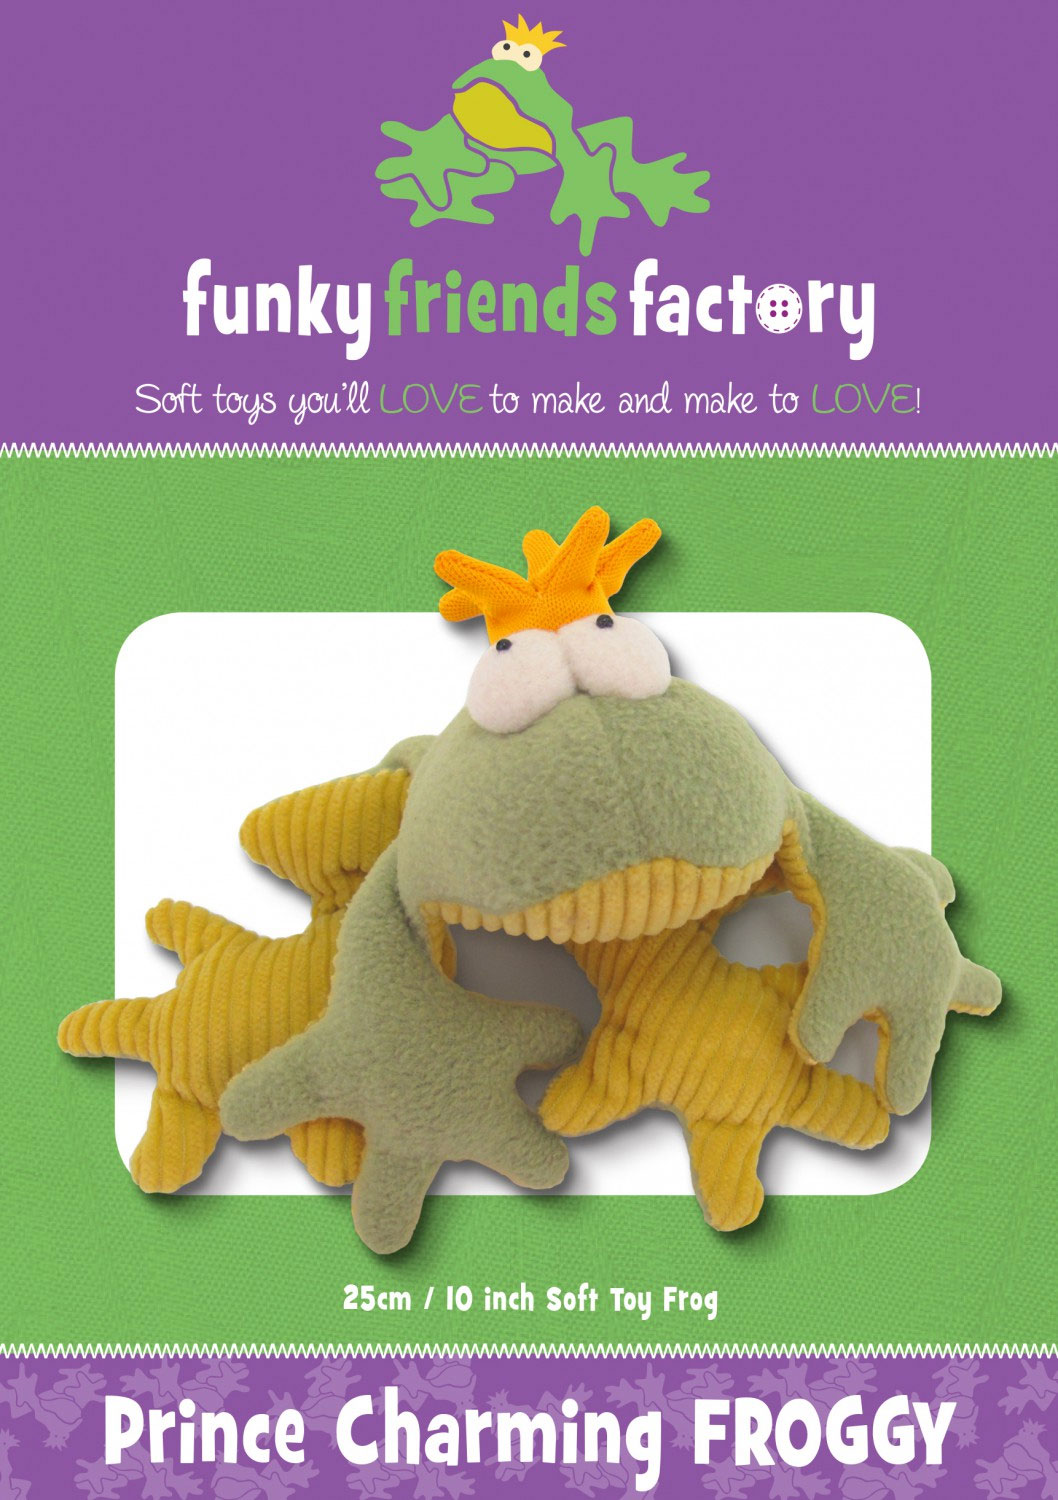 Prince-Charming-Froggy-sewing-pattern-Funky-Friends-Factory-front